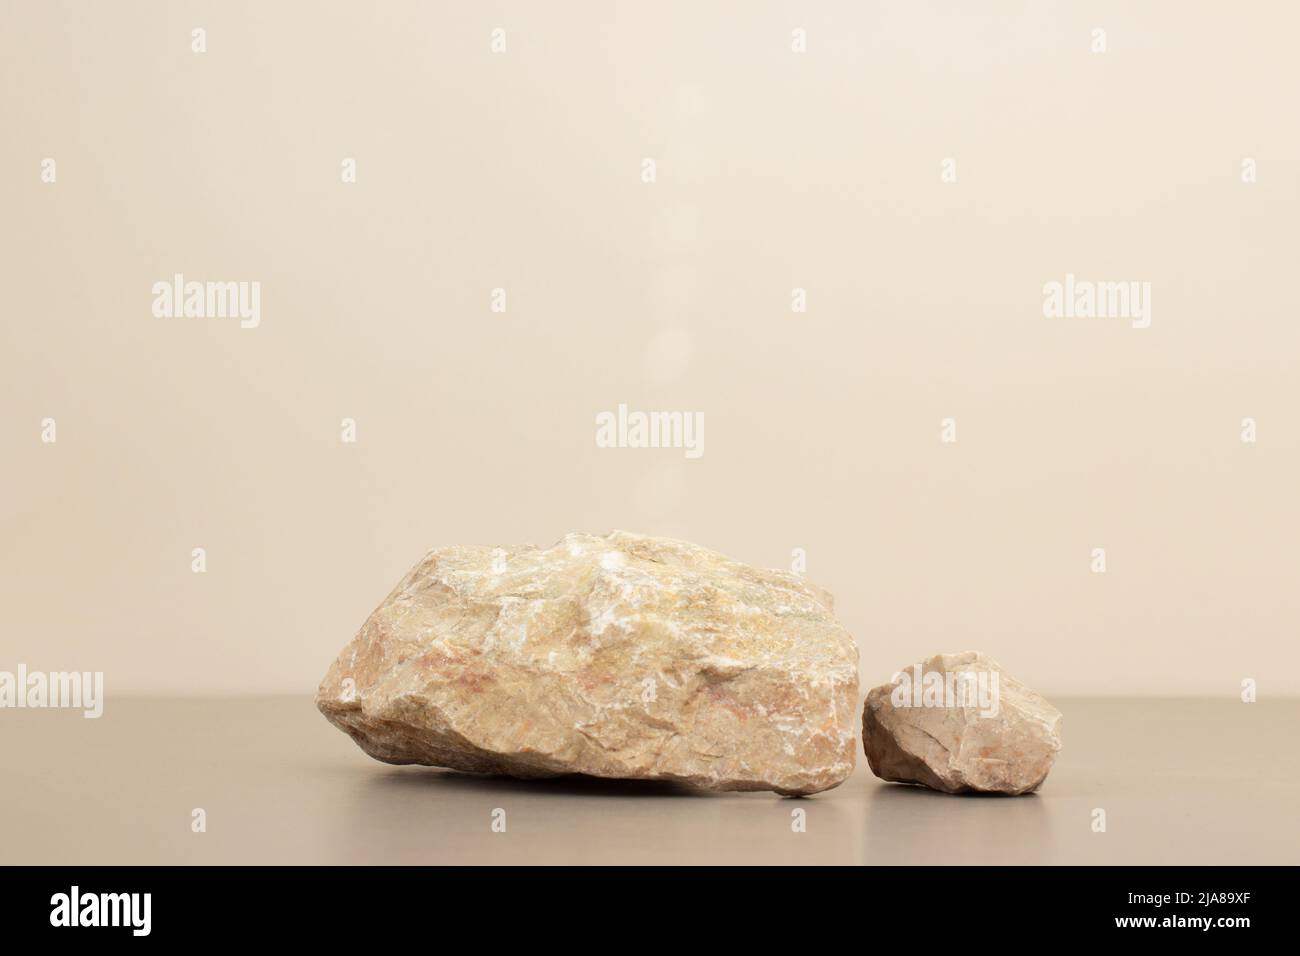 empty nature stone podium minimalism on light beige background. Copy space, place for text Stock Photo